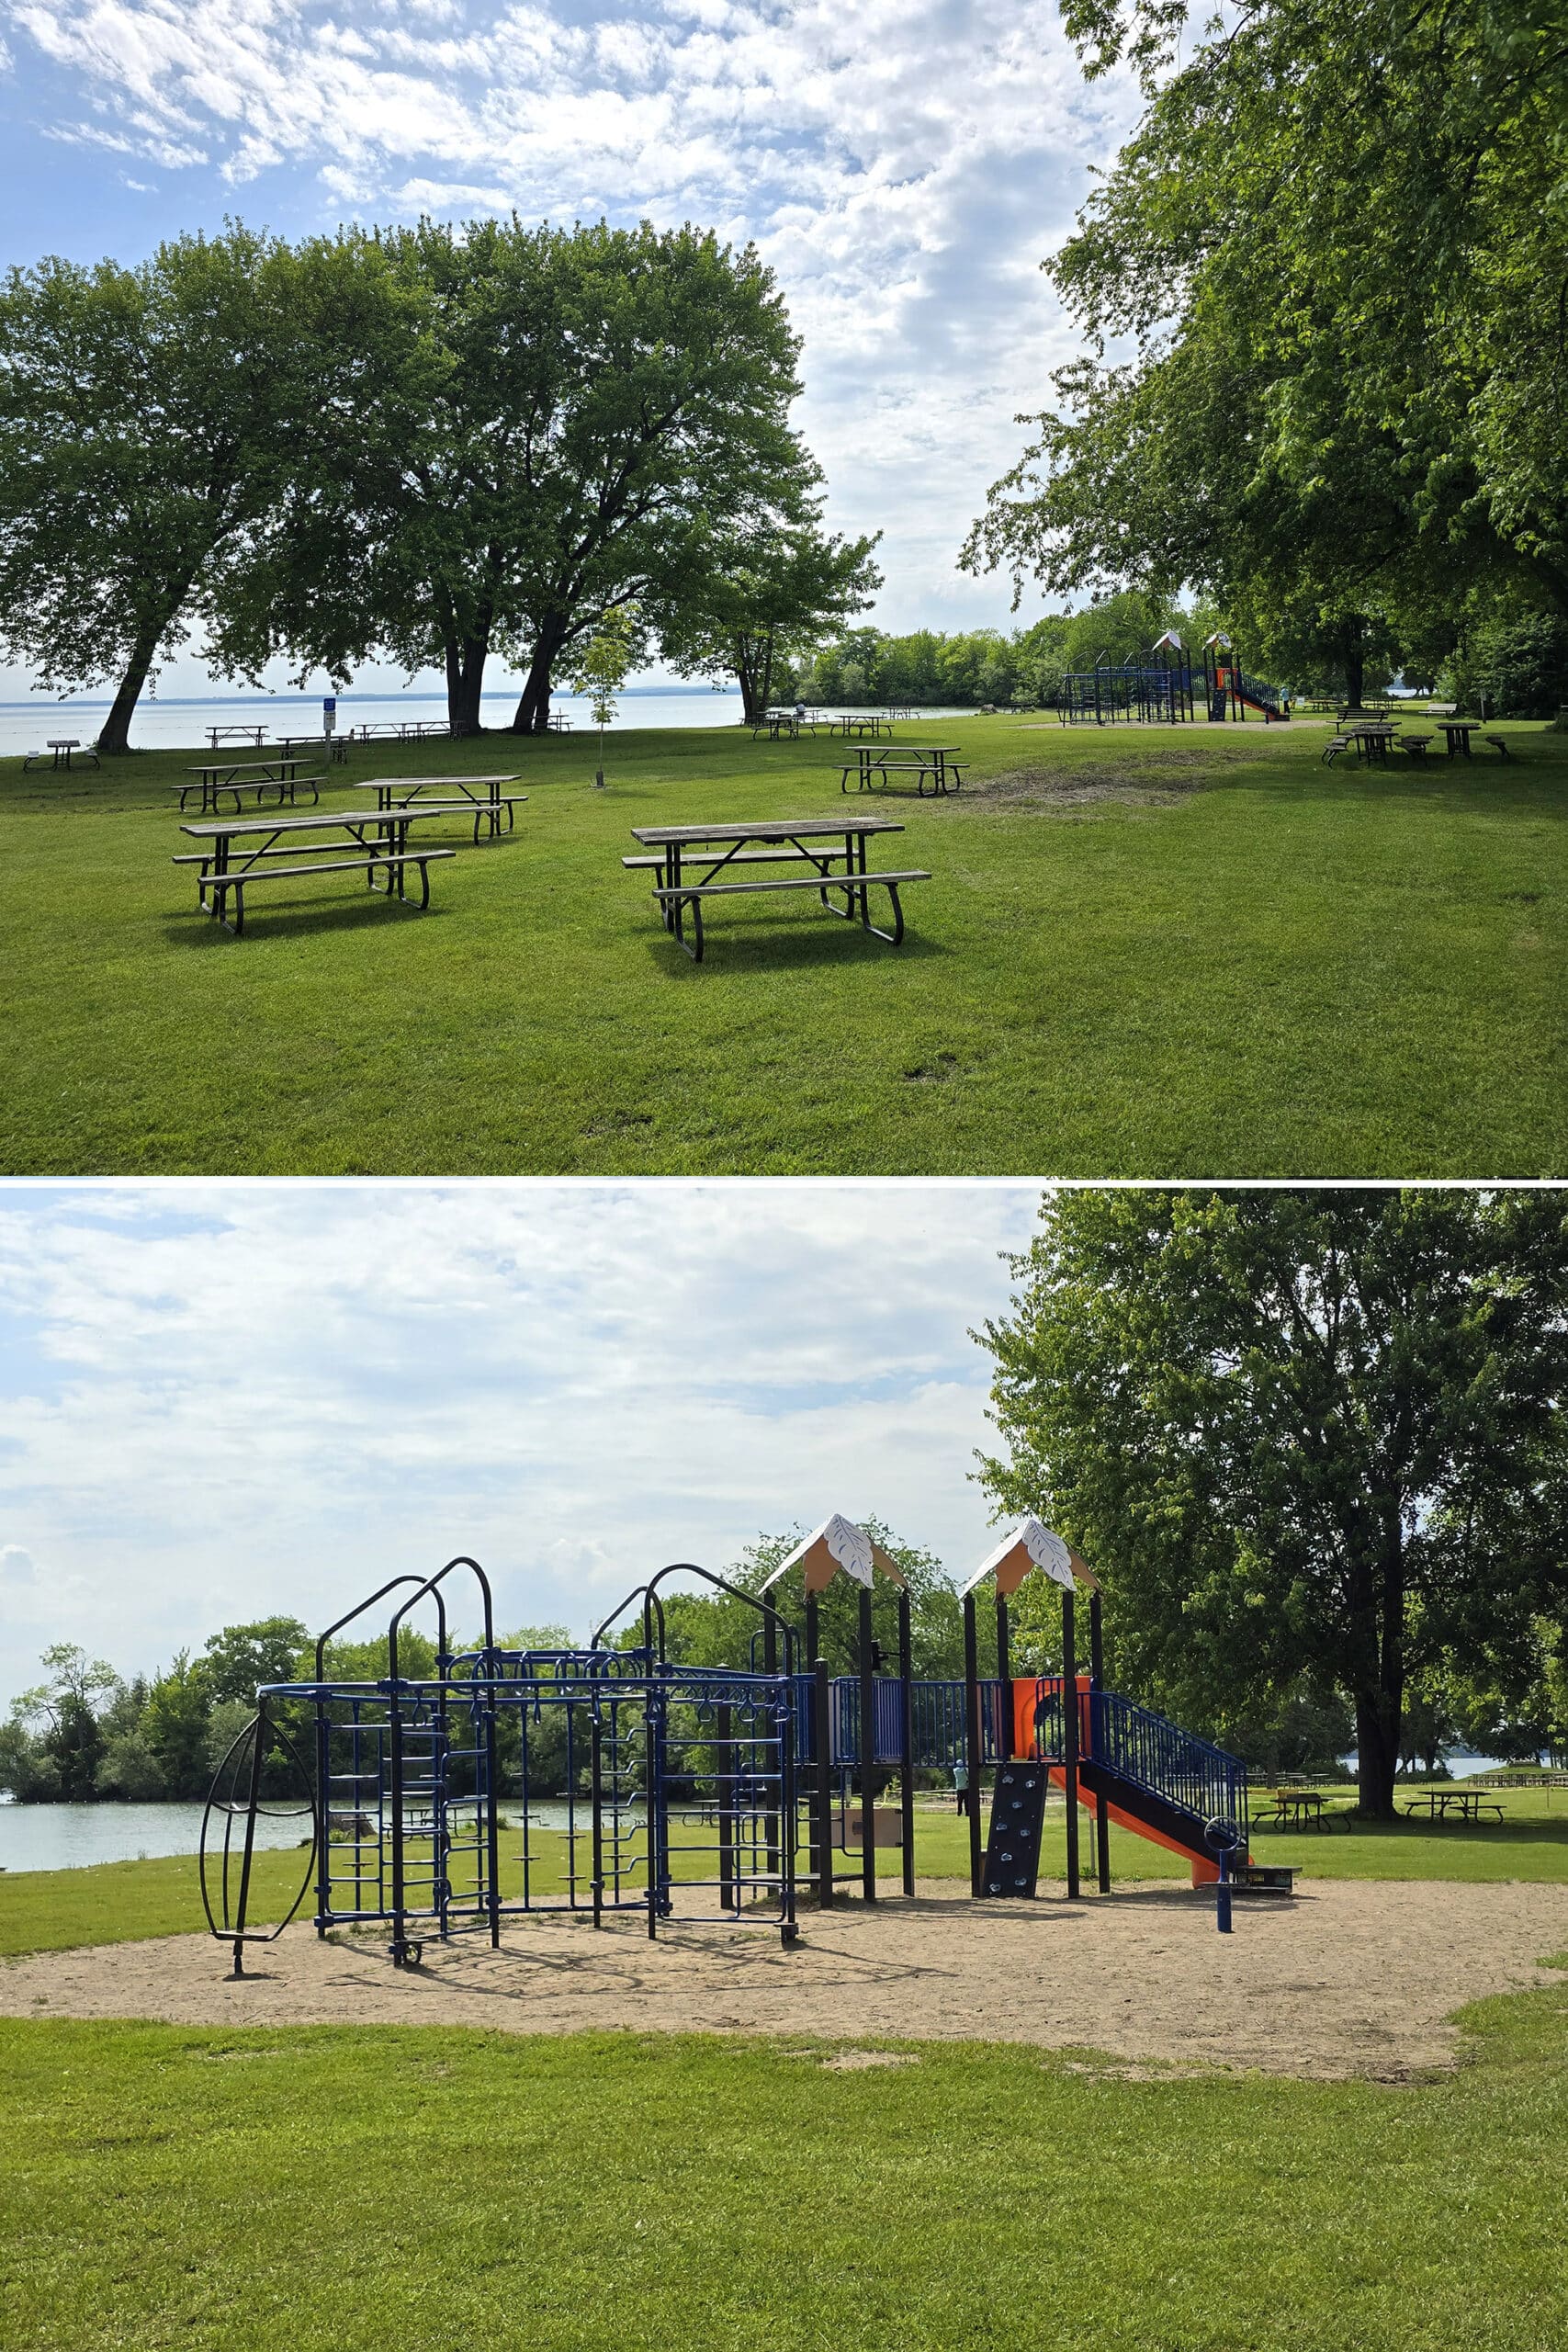 2 part image showing a picnic area and a playground.